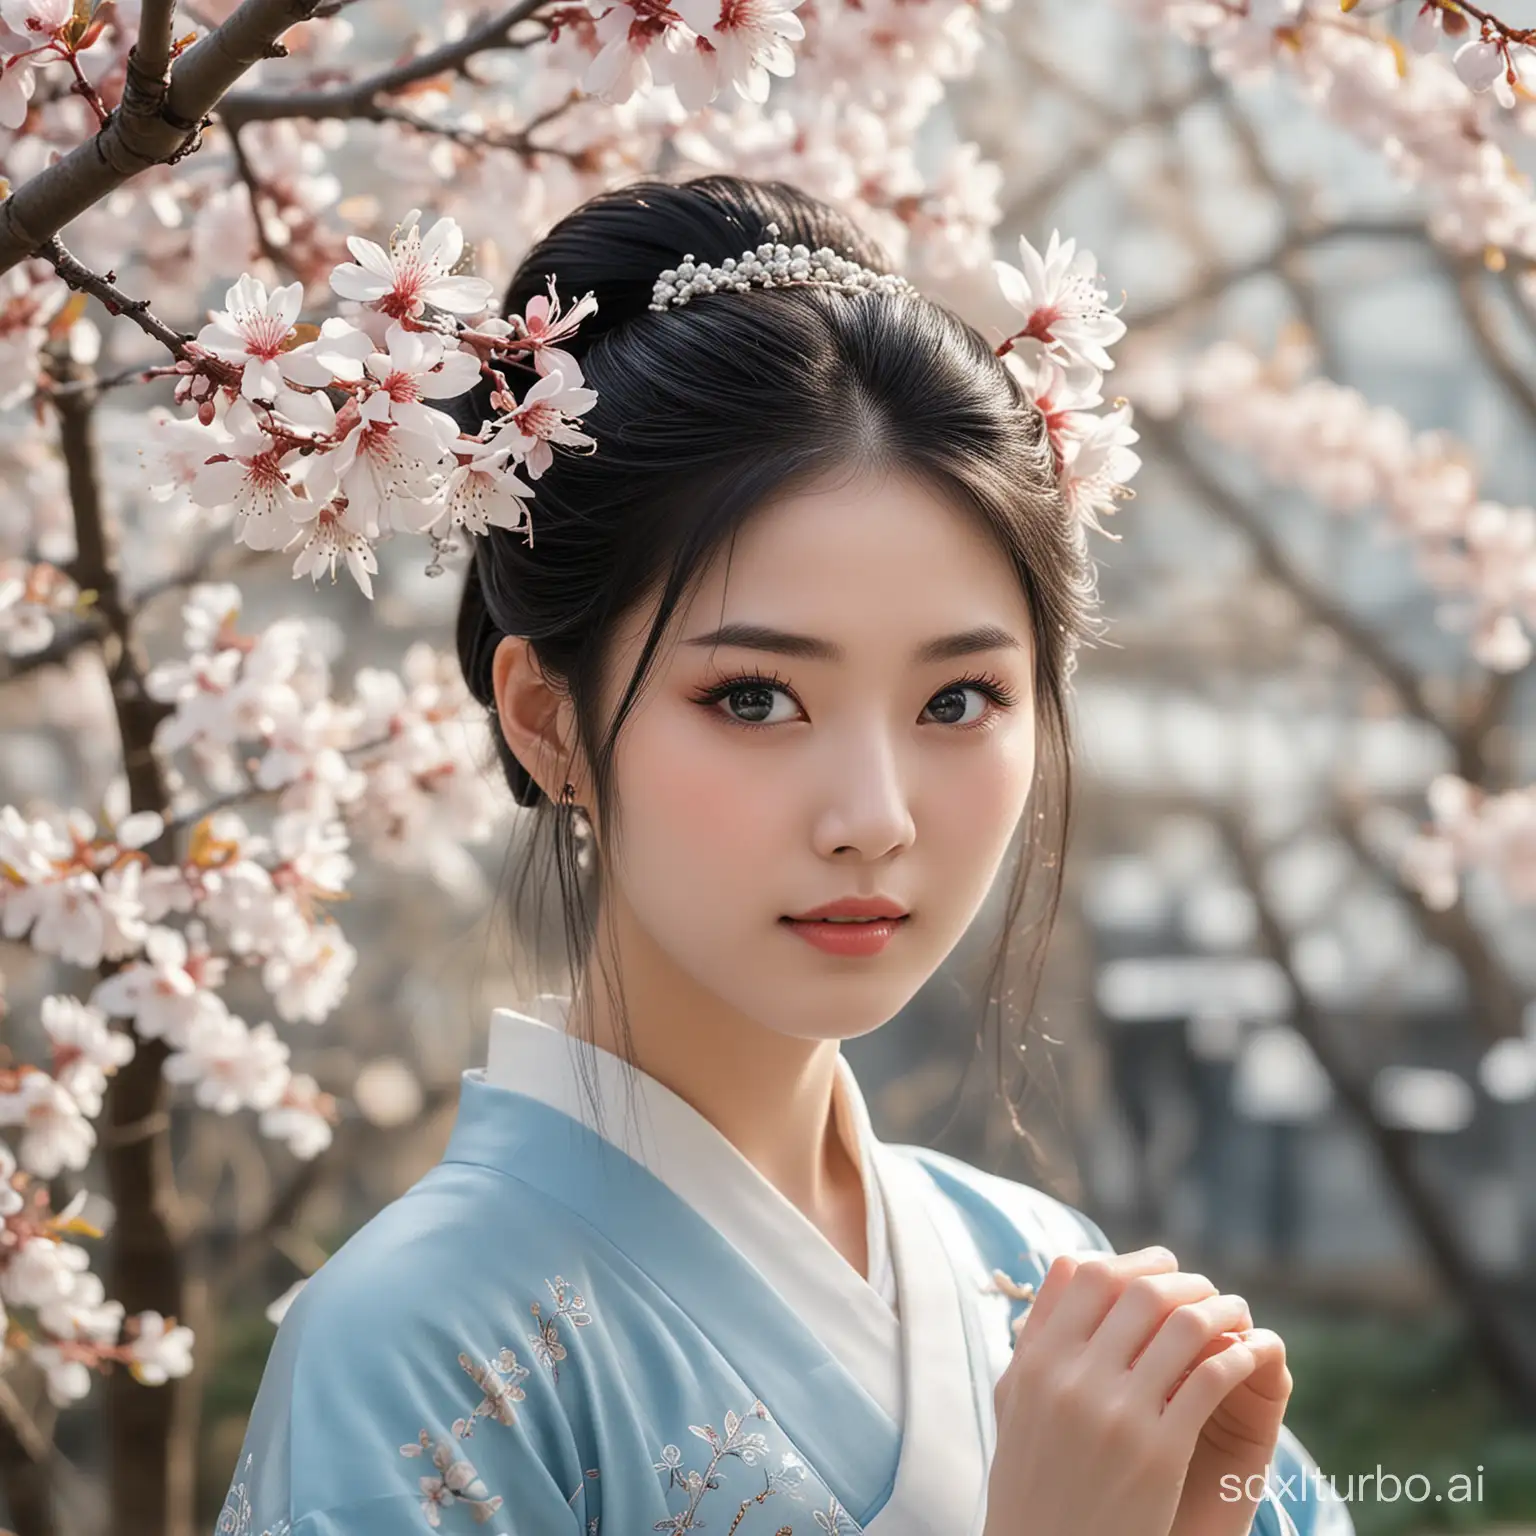 A girl, with very white complexion, pointed face, thin, looking at the flowers sideways, with long and black hair half tied up, adorned with a hairpin, faint and slender eyebrows. The gray-blue pupils are deep and intricate, with a high and deep nose bridge, wearing a semi-transparent white Hanfu, adorned with a ring on slender fingers, on a sunny day, looking at flowers under a cherry blossom tree.